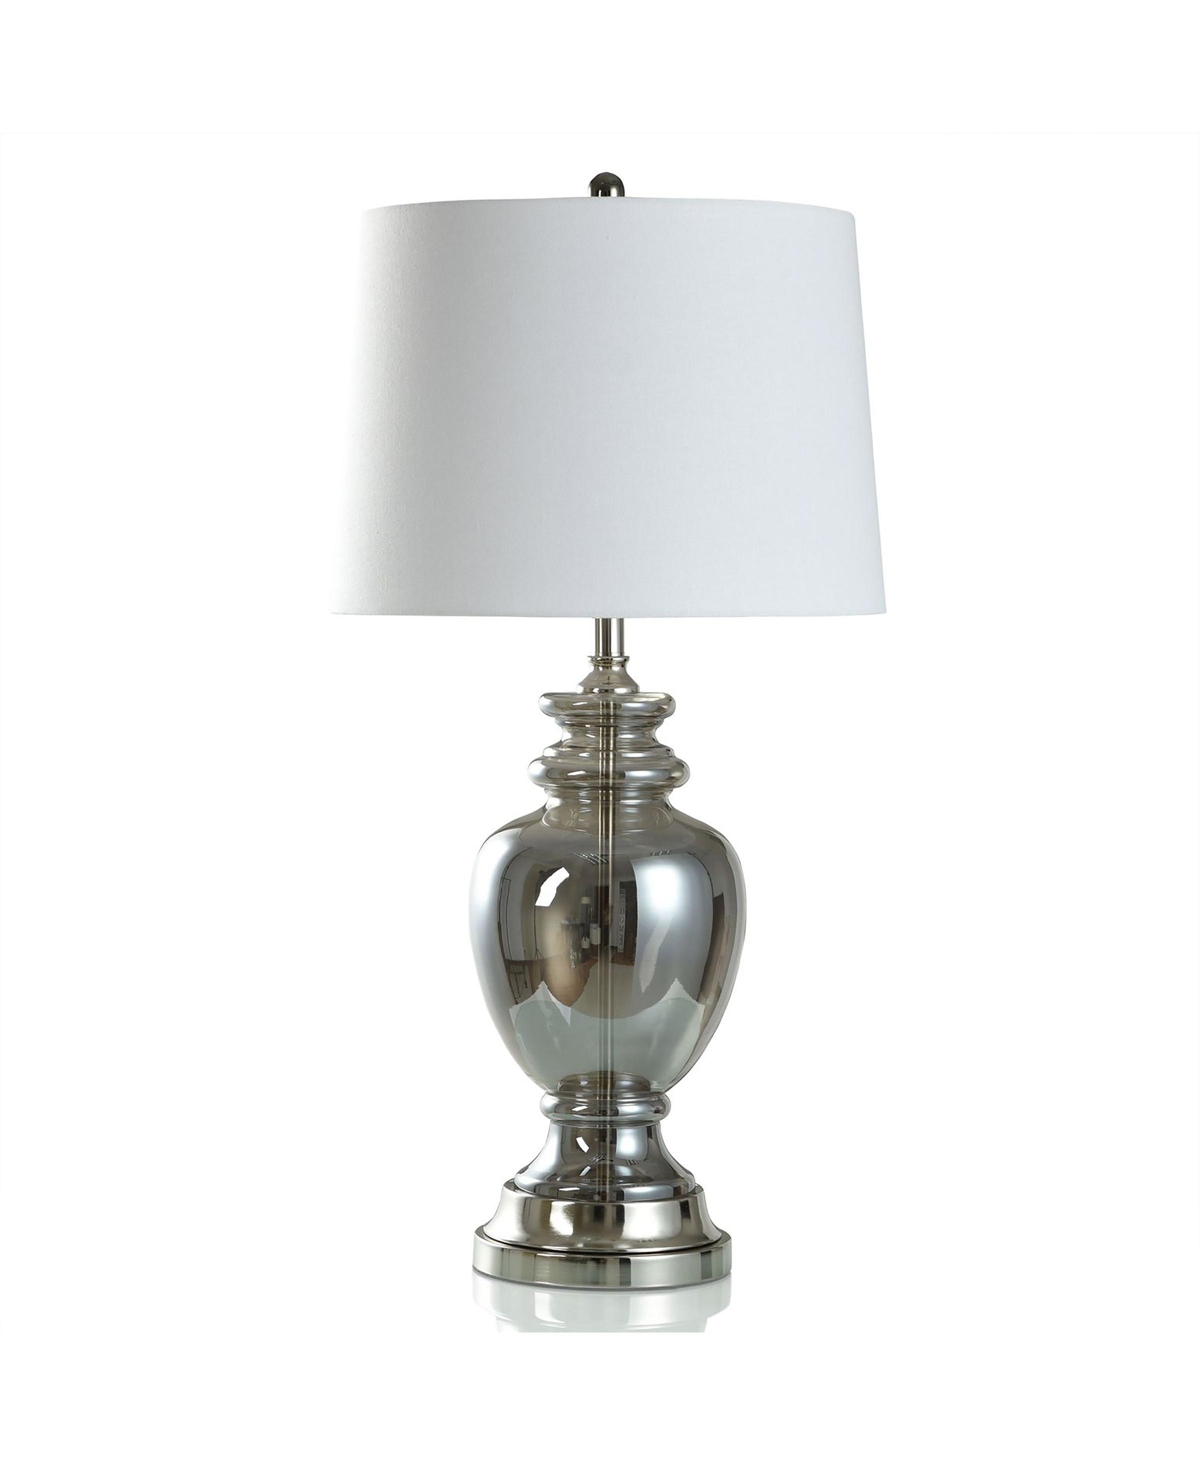 Stylecraft Home Collection 33.5" Mercury Antique-like Smoked Glass Table Lamp In Smokey Gray,chrome,semi-translucent